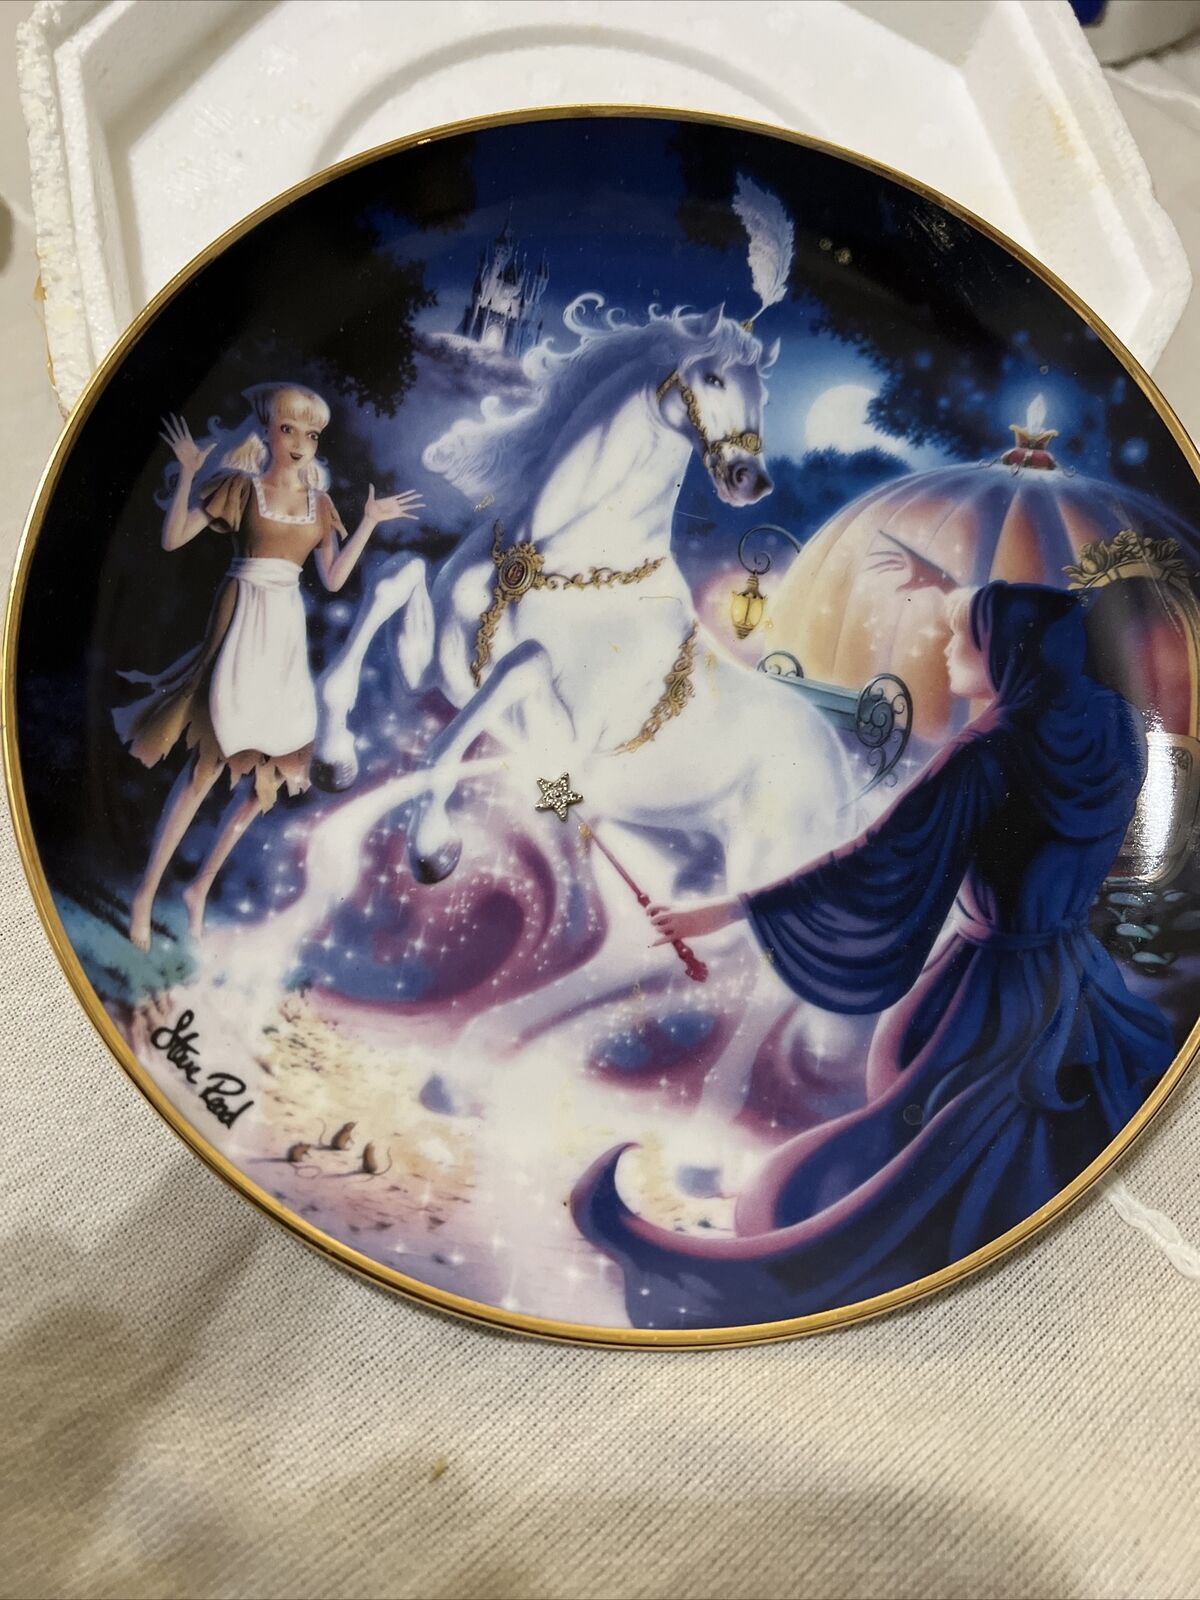 The Magical Moment - Steve Read Cinderella Plate 8” The Franklin Mint 